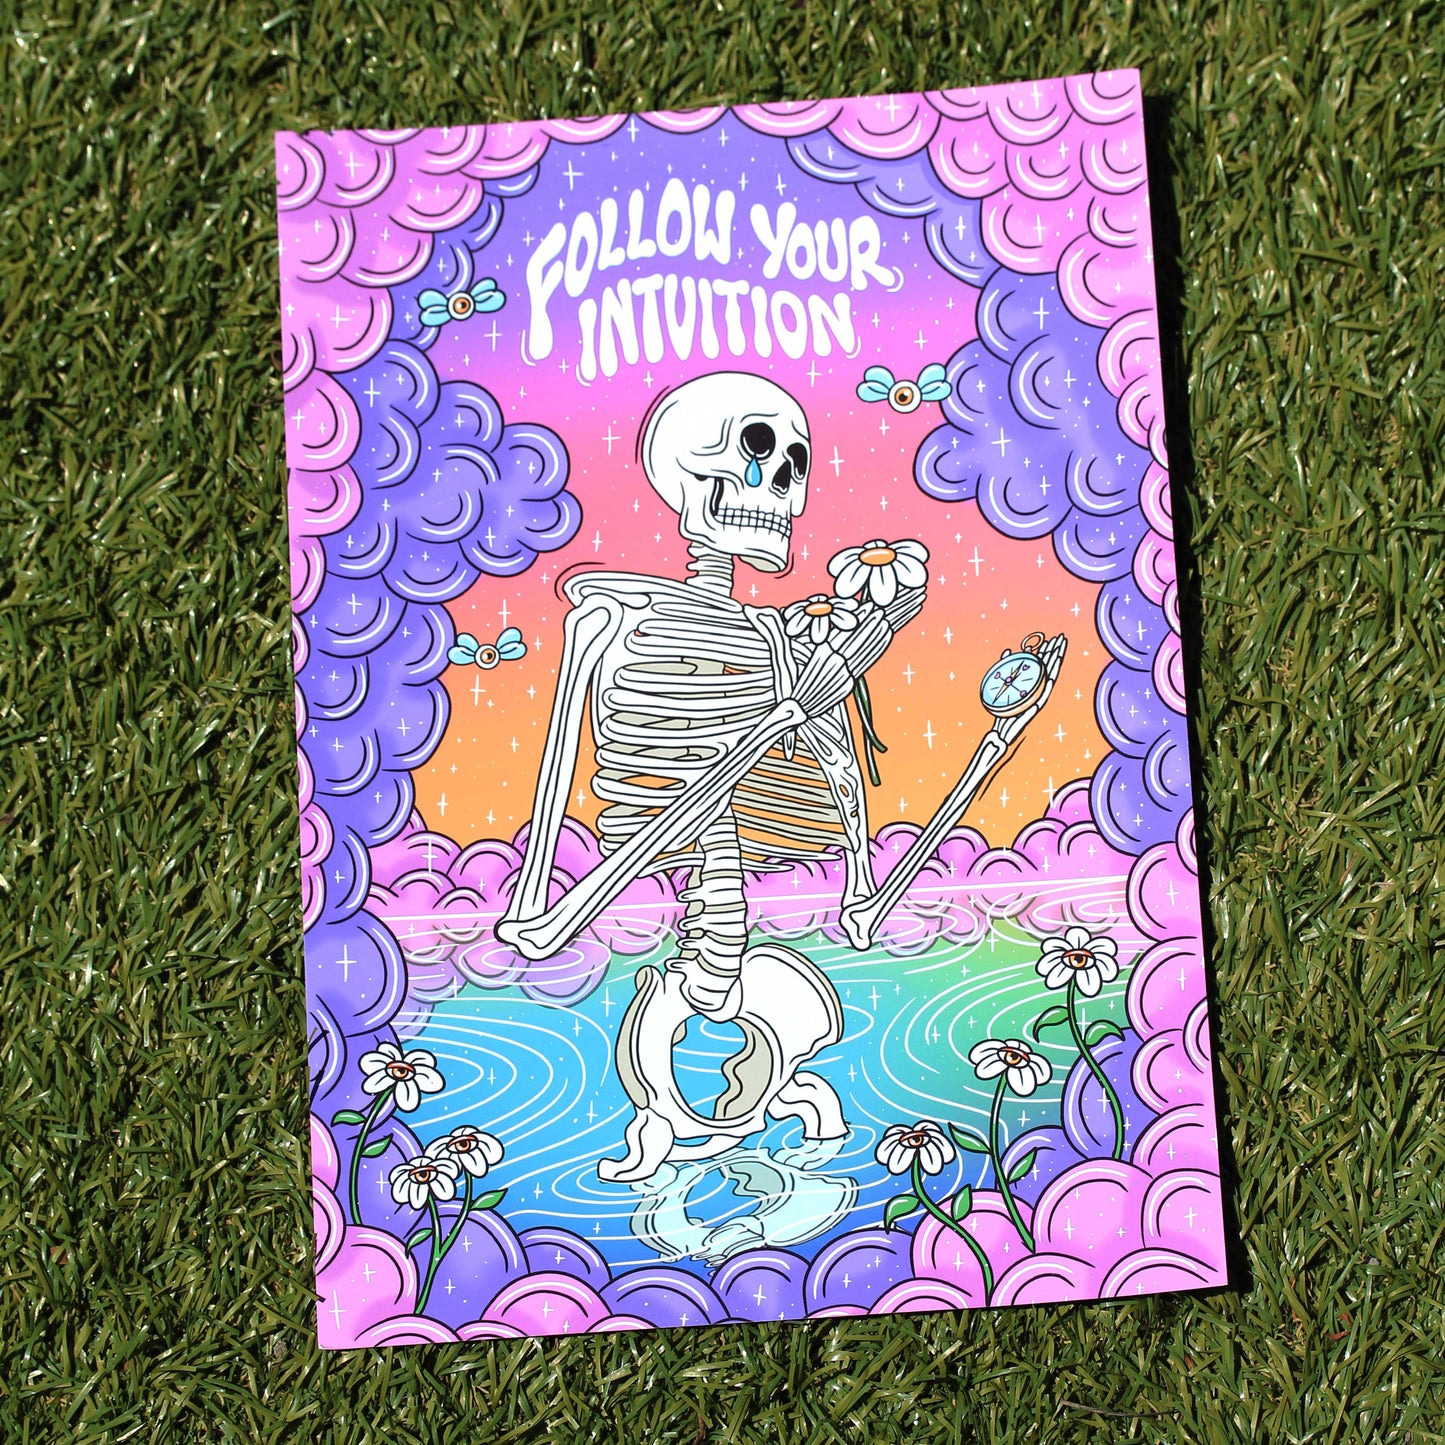 Follow Your Intuition Skeleton Art Print Wall Poster